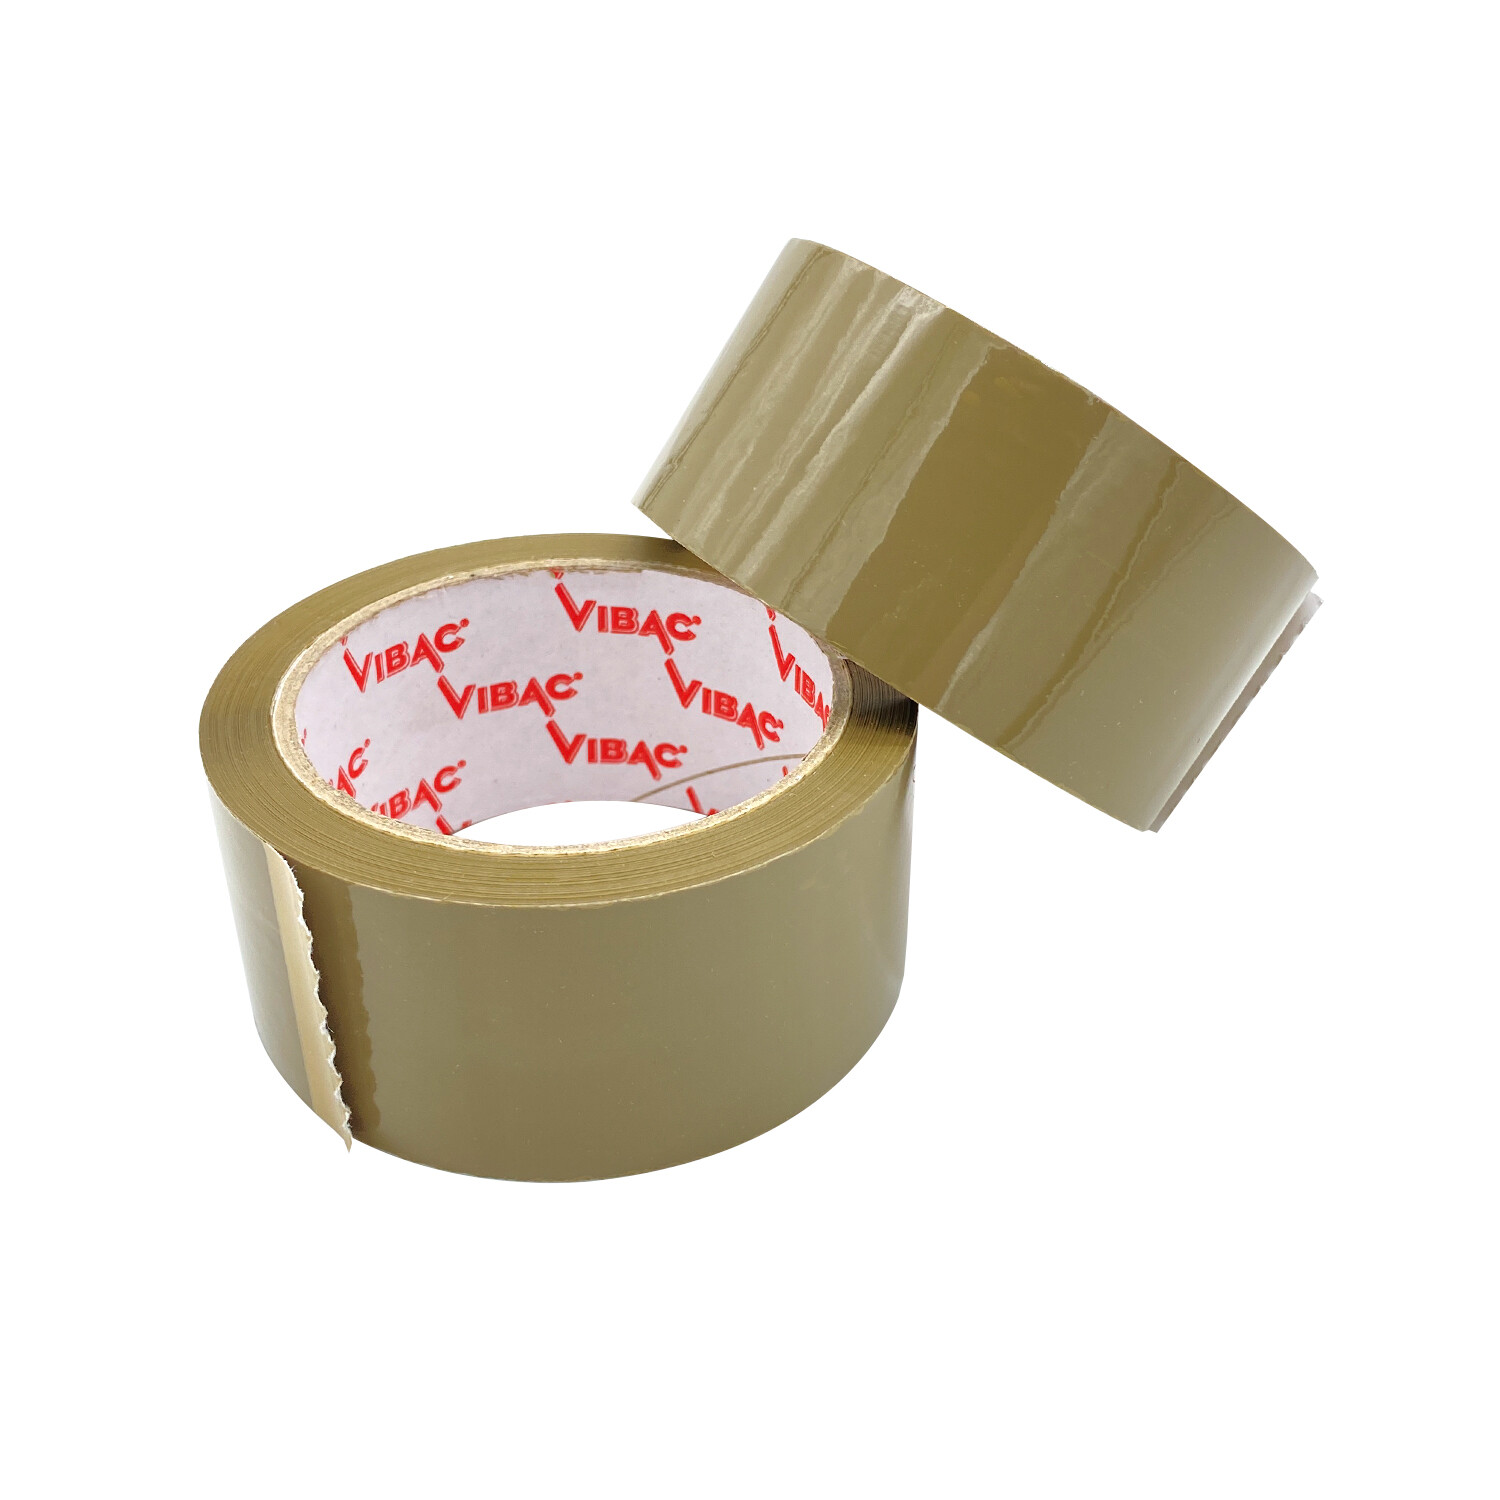 NEW VIBAC X-Strong BROWN PACKING PARCEL TAPE 48mm x 66M 